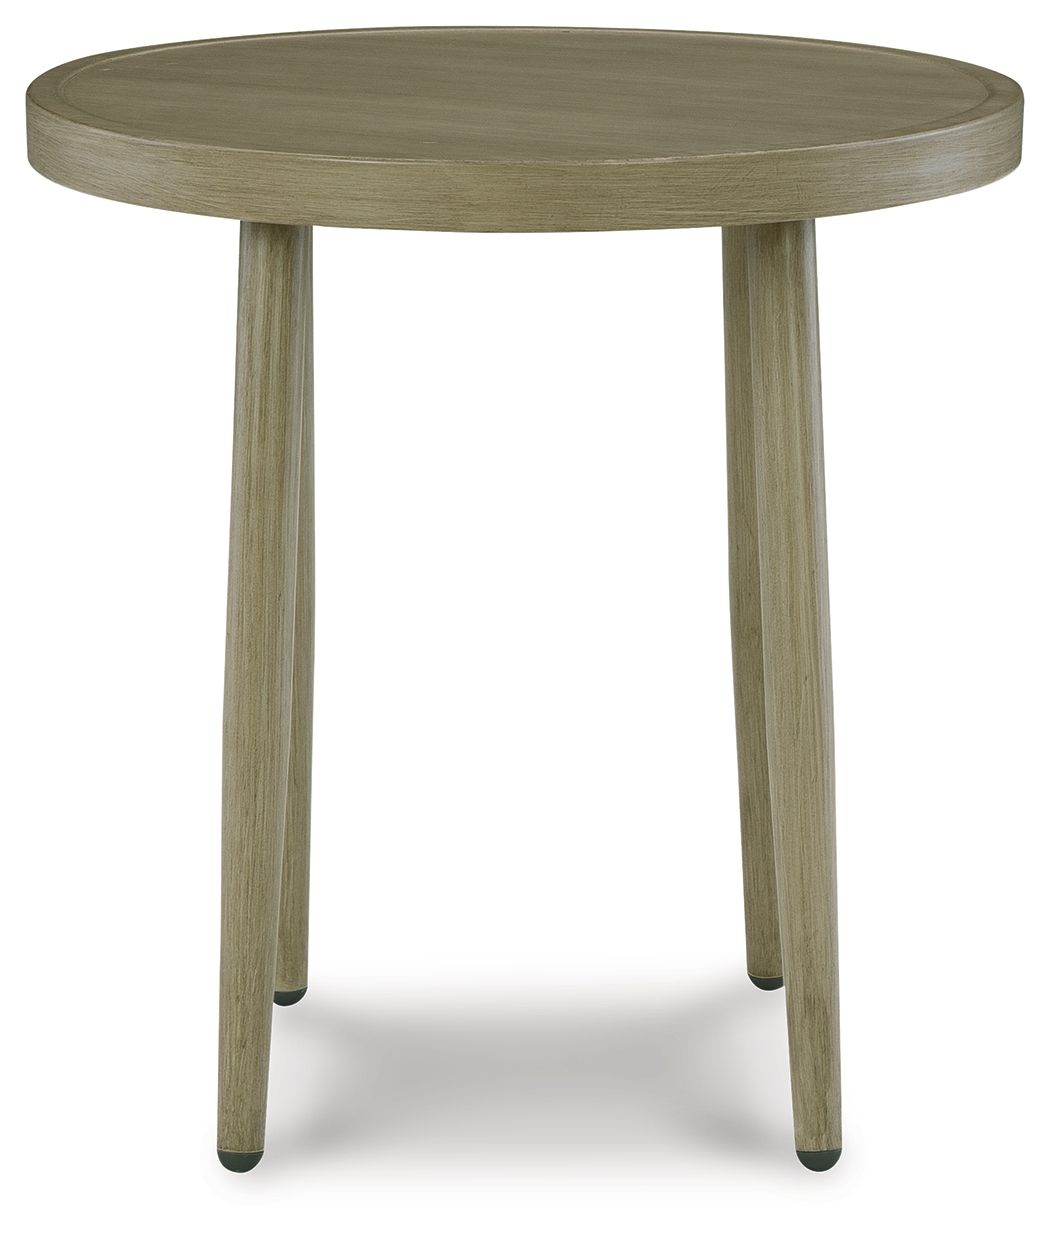 Swiss Valley - Beige - Outdoor Coffee Table With 2 End Tables - Tony's Home Furnishings